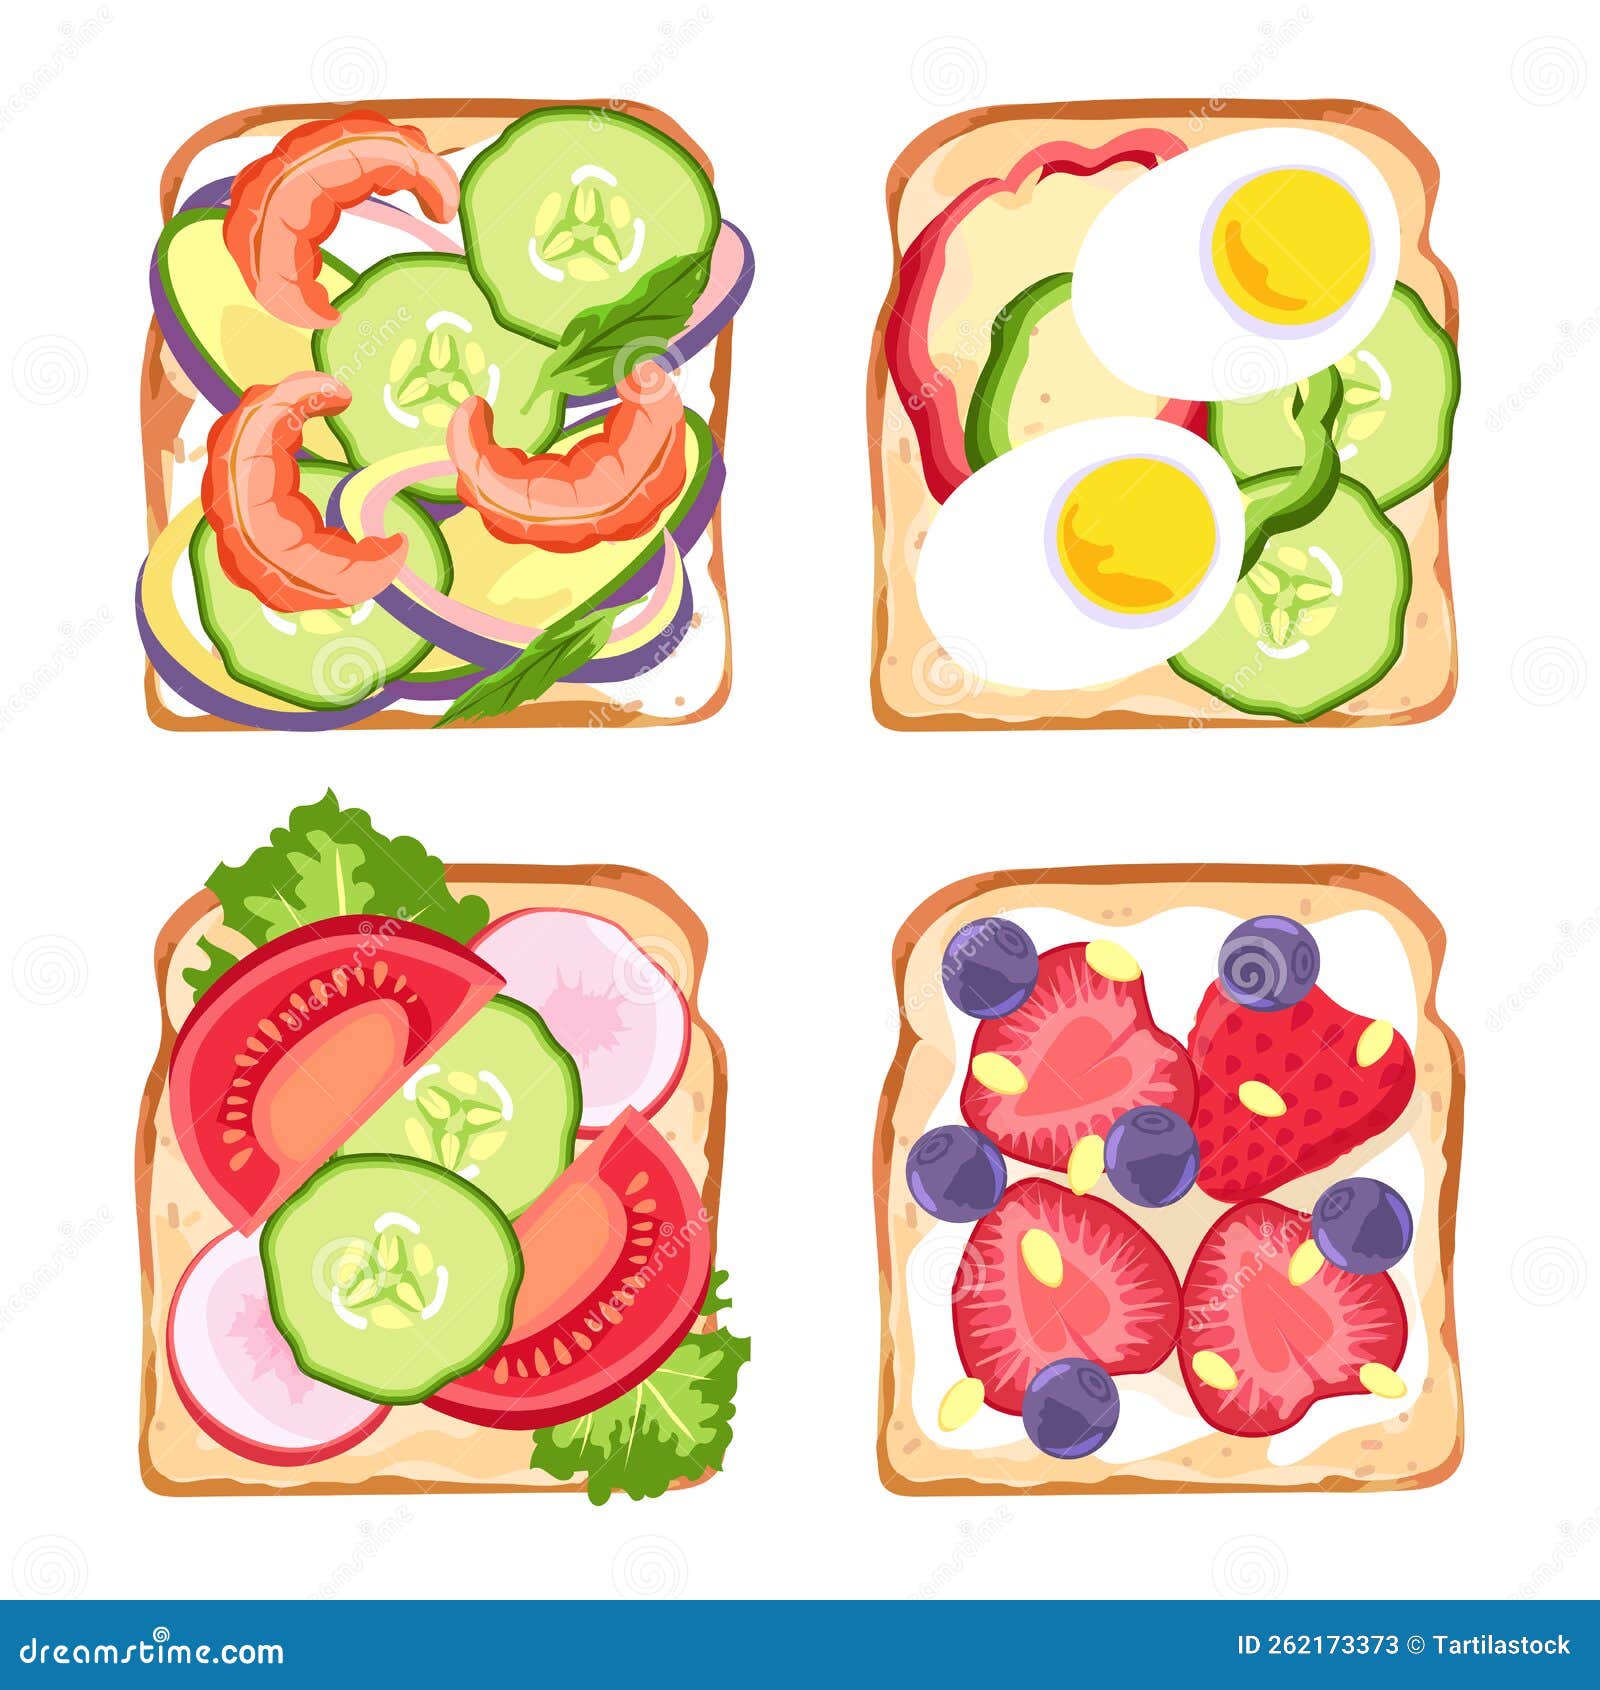 https://thumbs.dreamstime.com/z/healthy-sandwiches-set-top-view-illustration-meal-isolated-breakfast-lunch-tasty-vector-nutrition-sandwich-snack-262173373.jpg